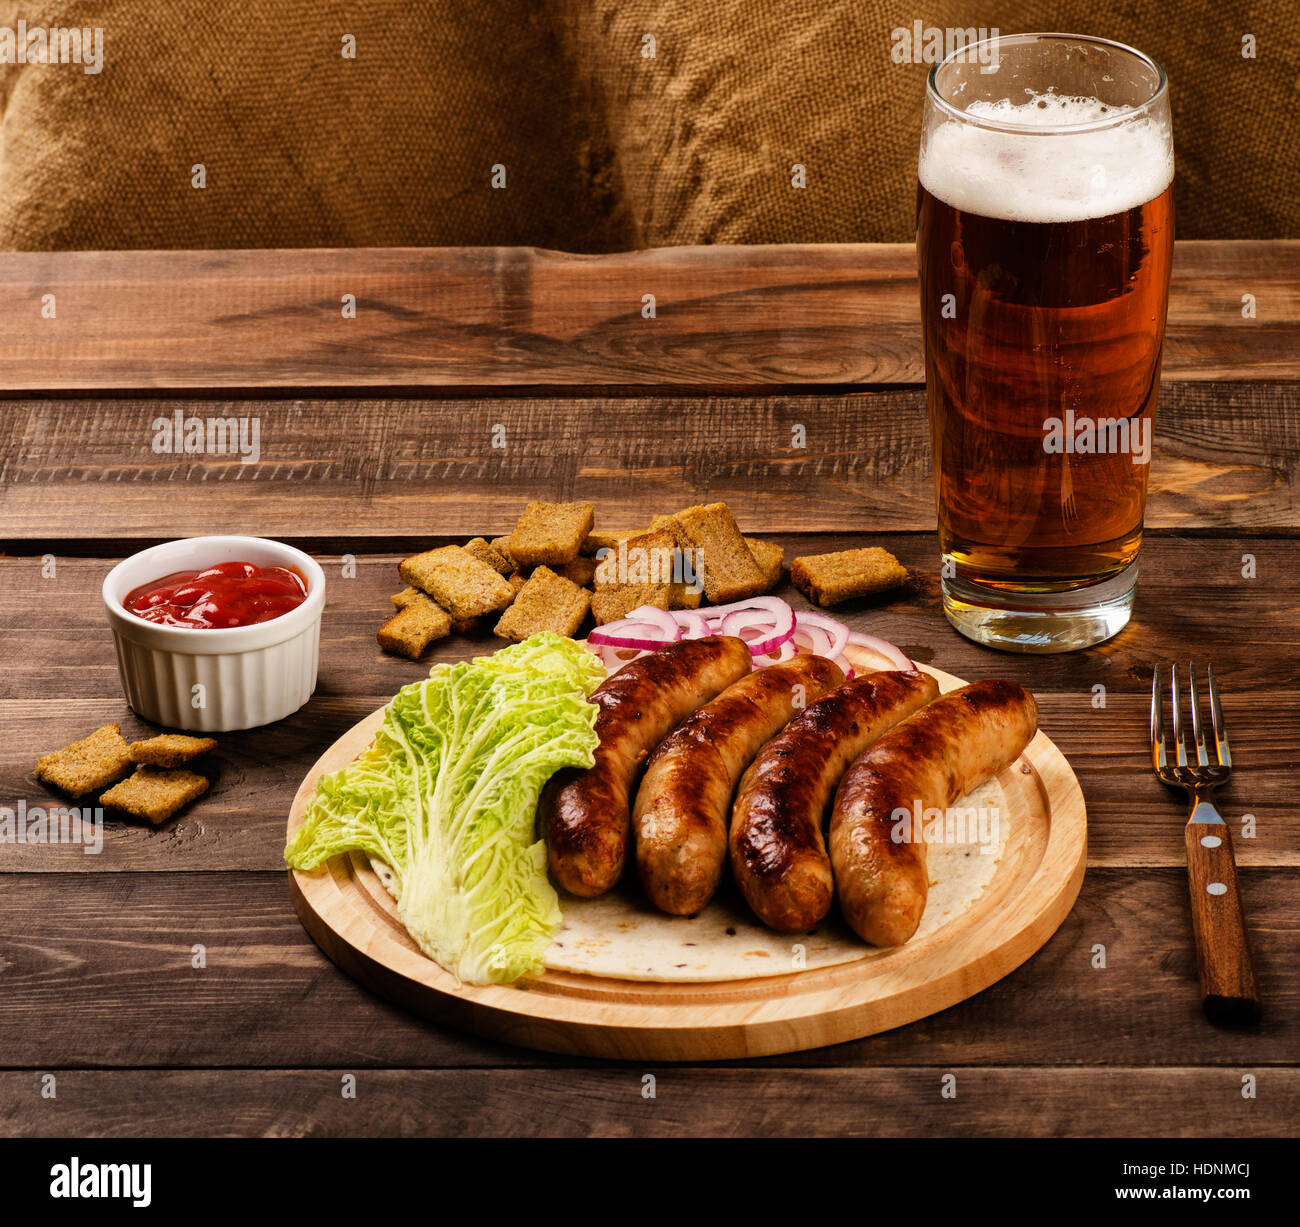 Grilled sausages with glass of beer, croutons and chinese cabbage on wooden table Stock Photo